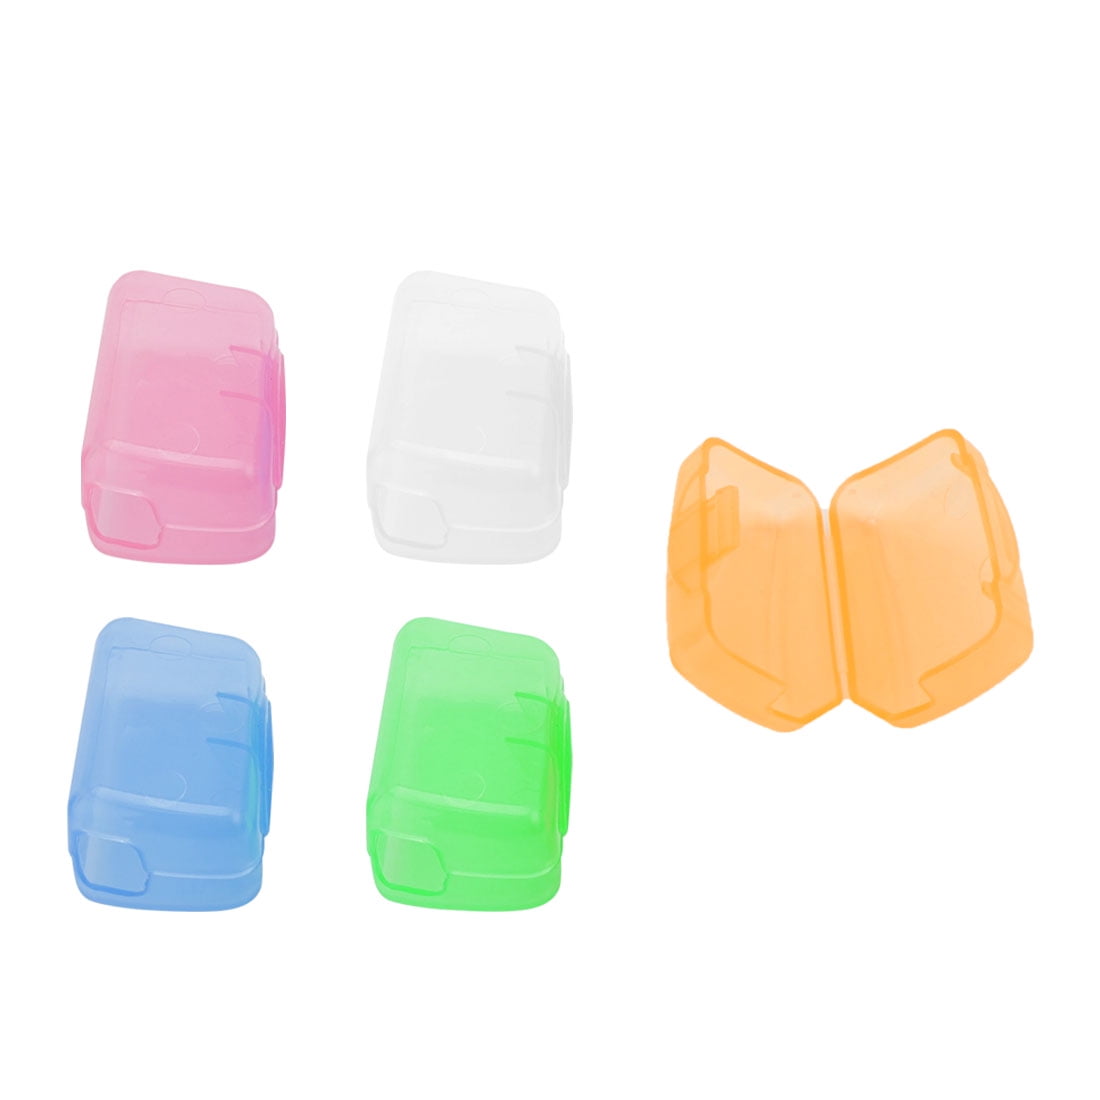 10PC Toothbrush Head Cover Holder Travel Camping Case Protect Brush Cap Case EAX